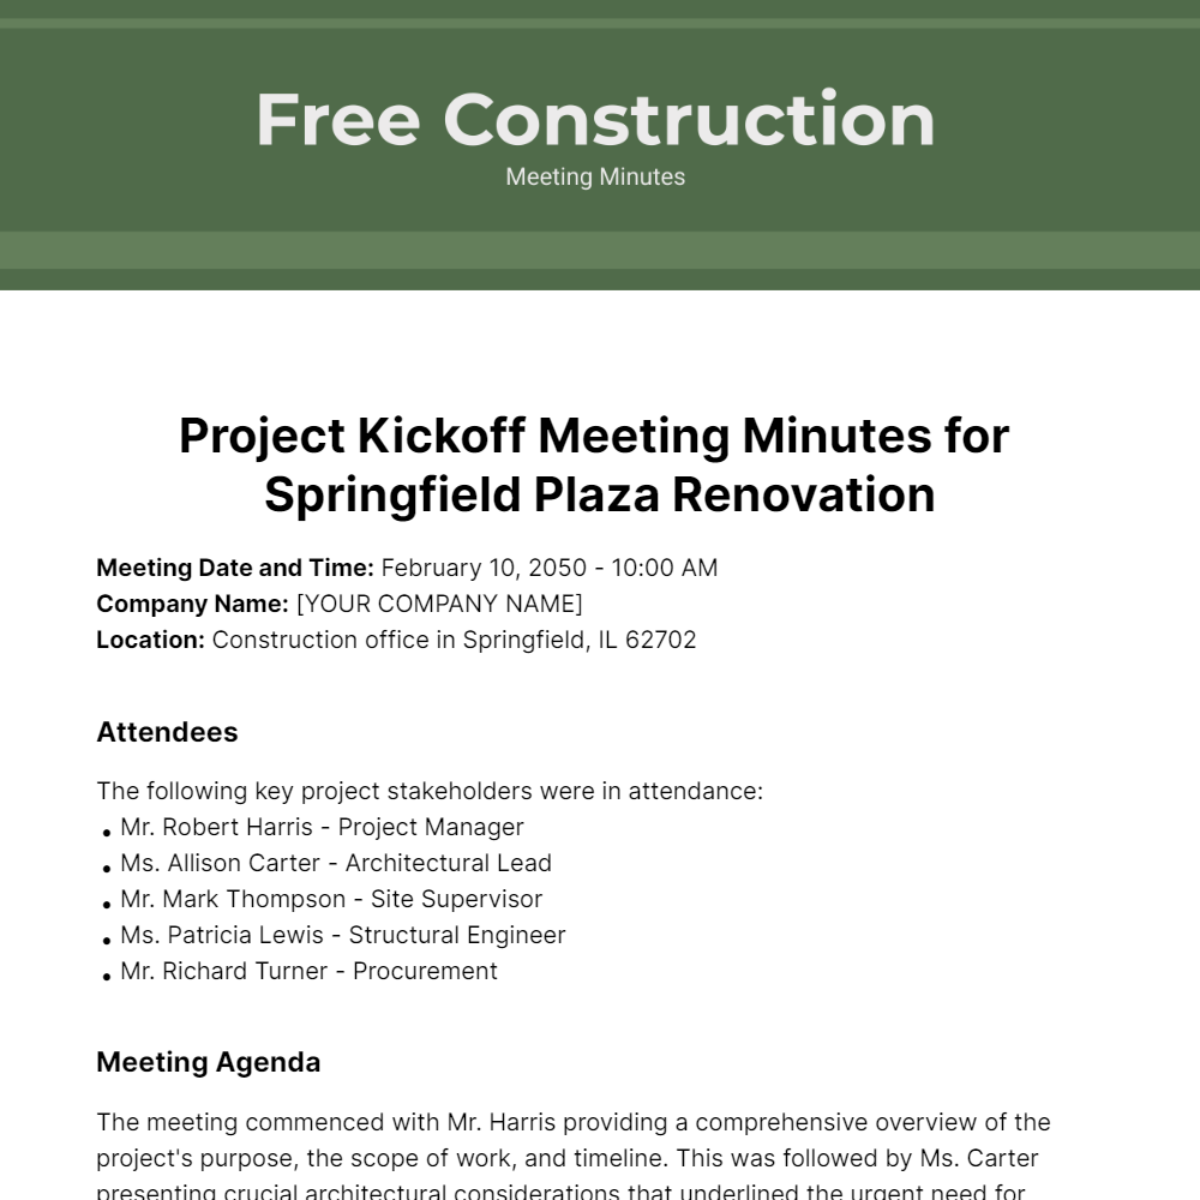 Construction Meeting Minutes Template